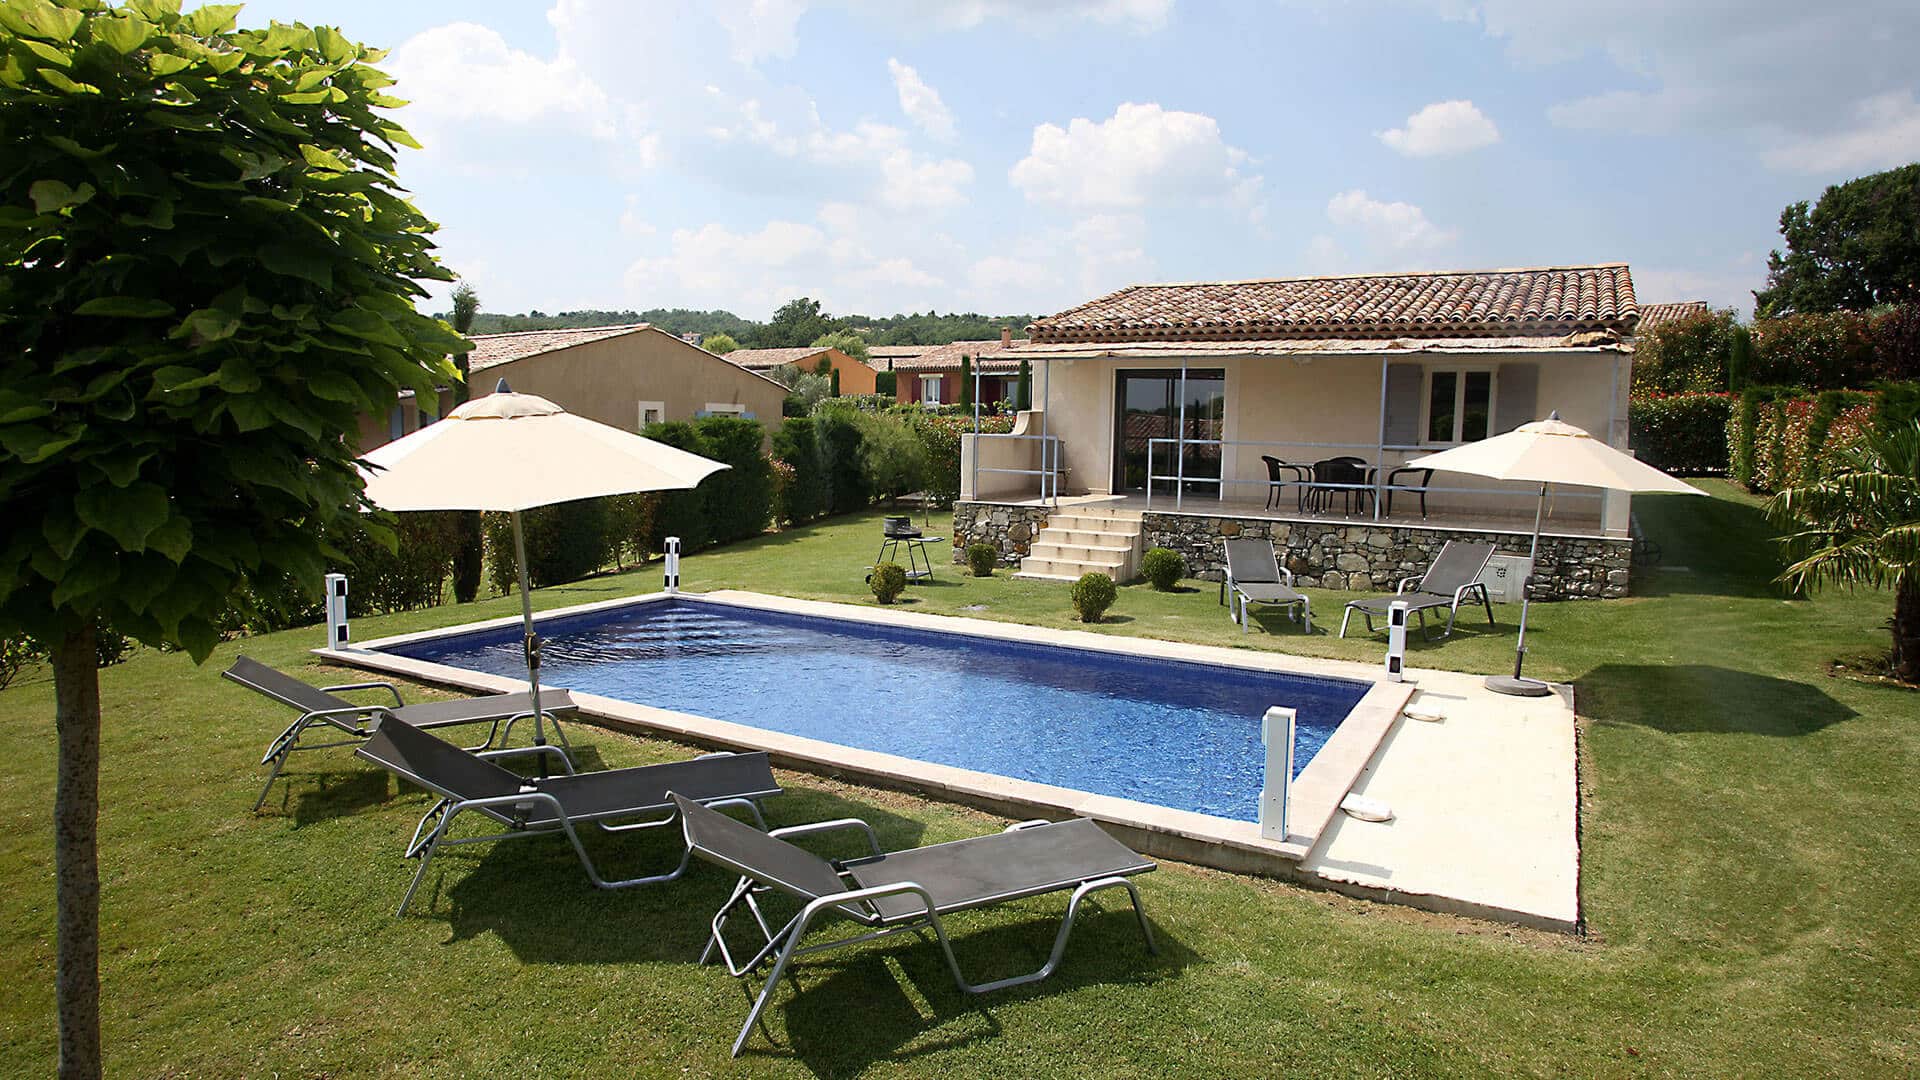 Holiday villa to rent in Provence | Villa blanche | Heated pool